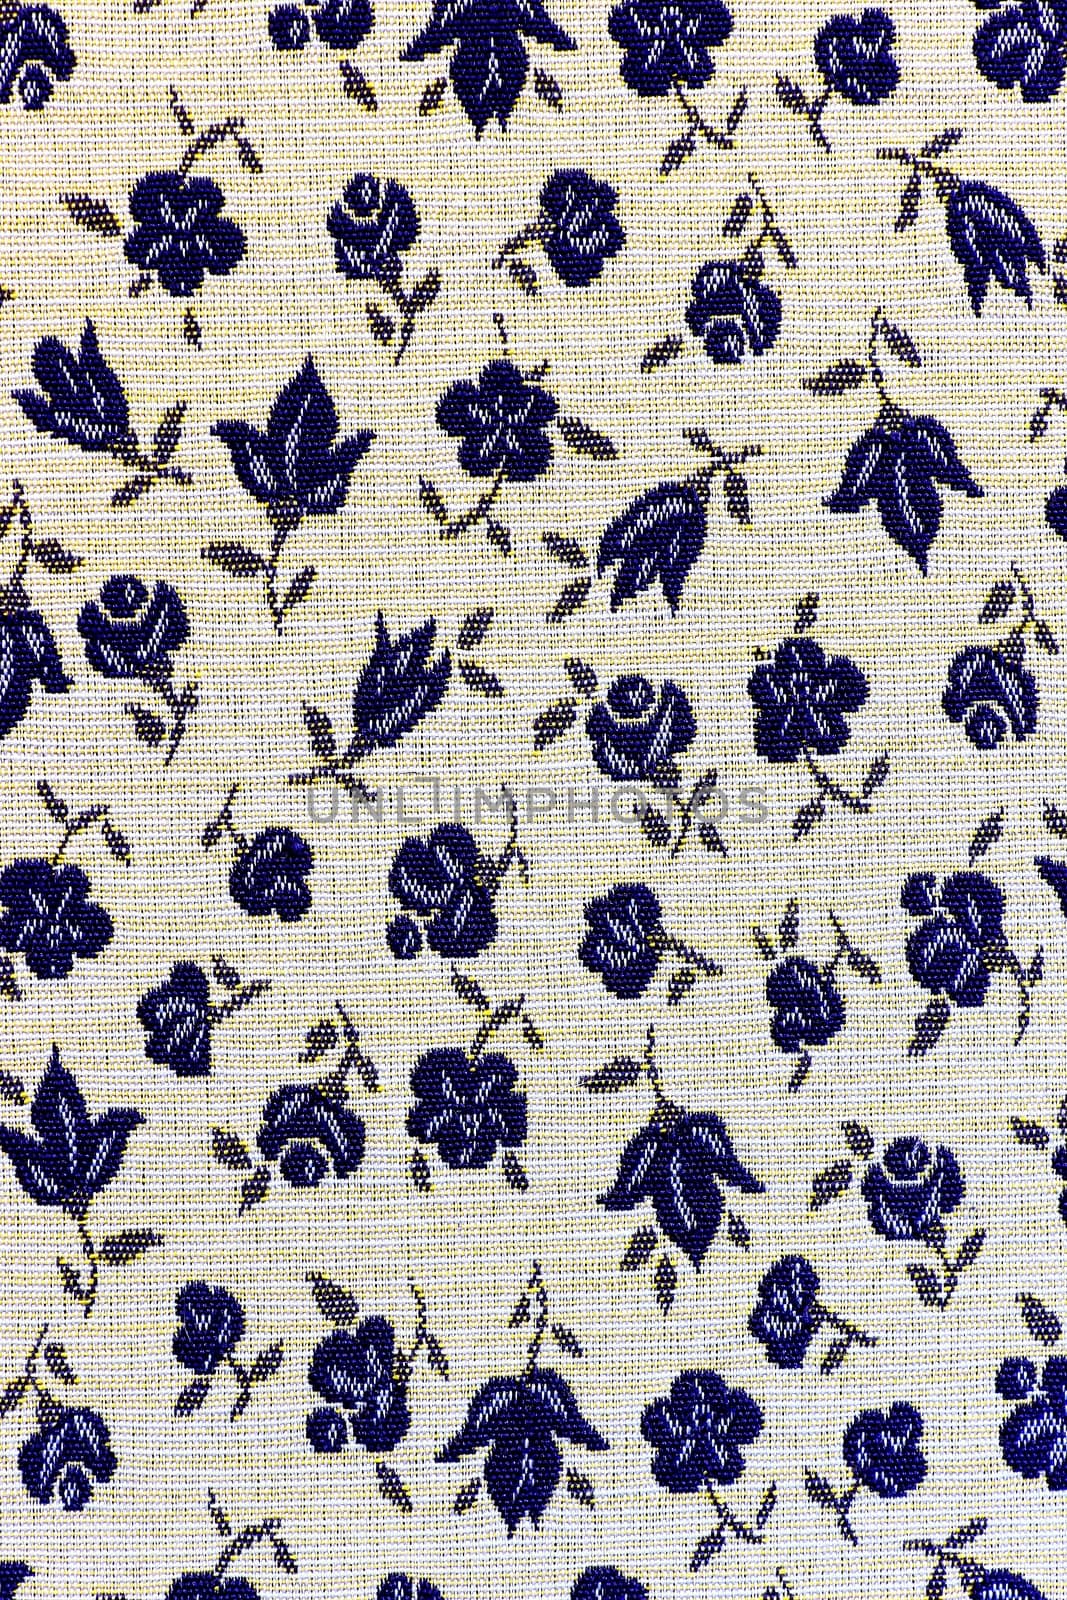 Old woven with flowers white and blue







Old white and blue flowered woven